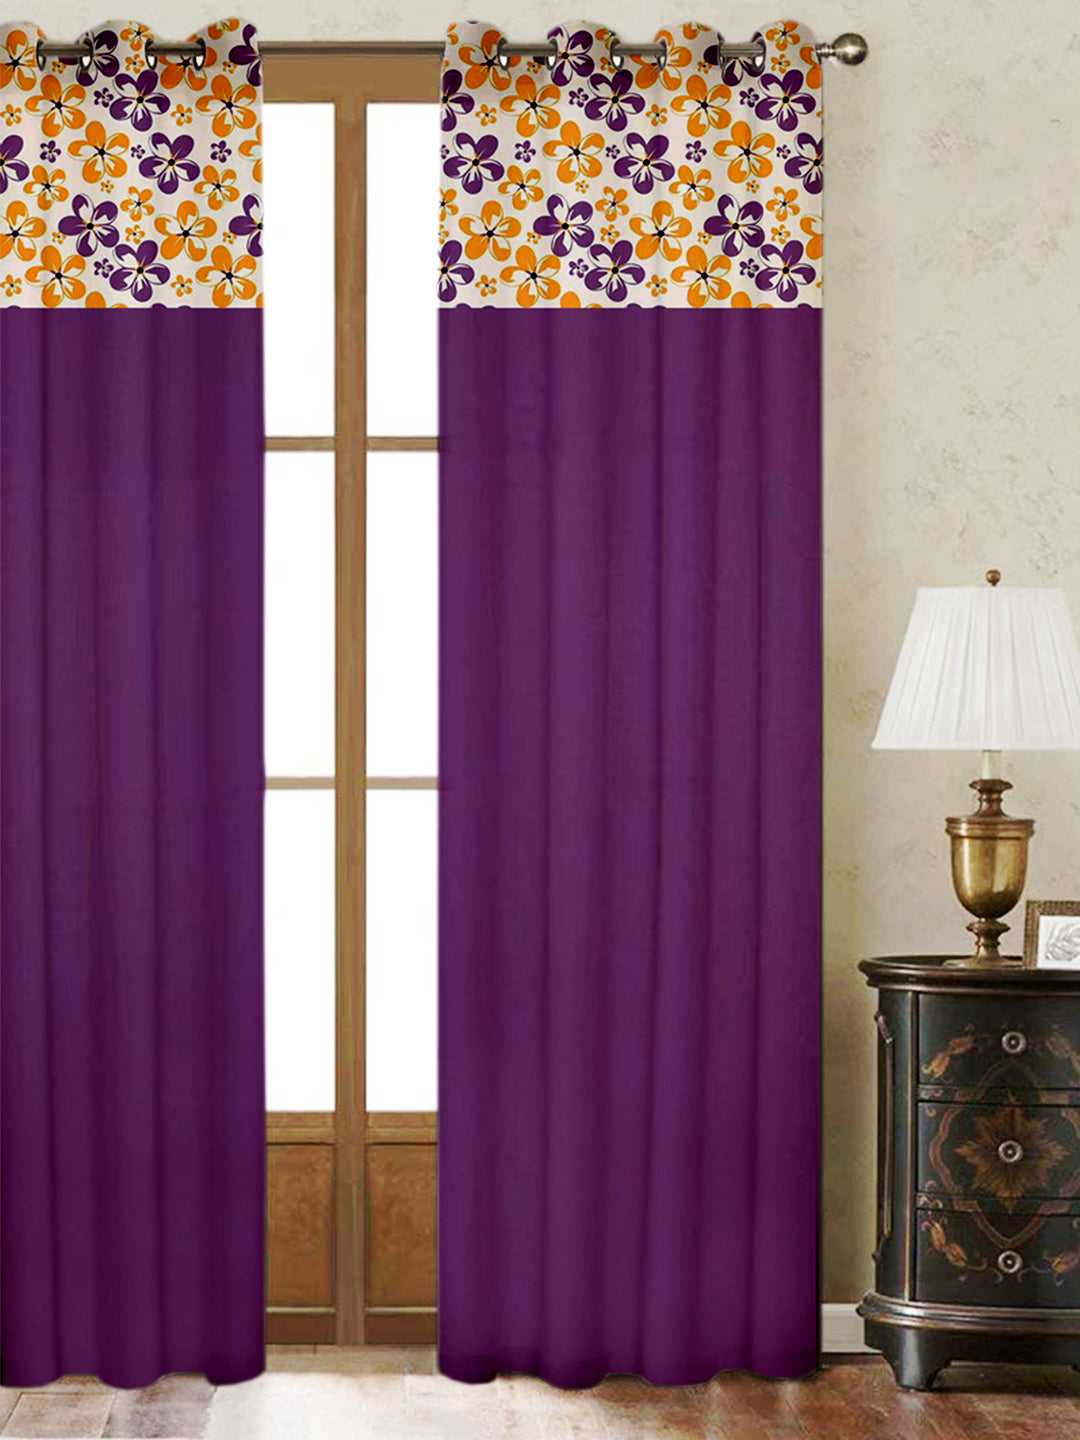 Lushomes Cotton Curtains, Purple Shadow Printed Cotton Curtains for Living Room/Home with 8 Eyelets & Printed Tiebacks for curtains 9 feet long, Door Curtain (54x108 Inches, Pack of 1)